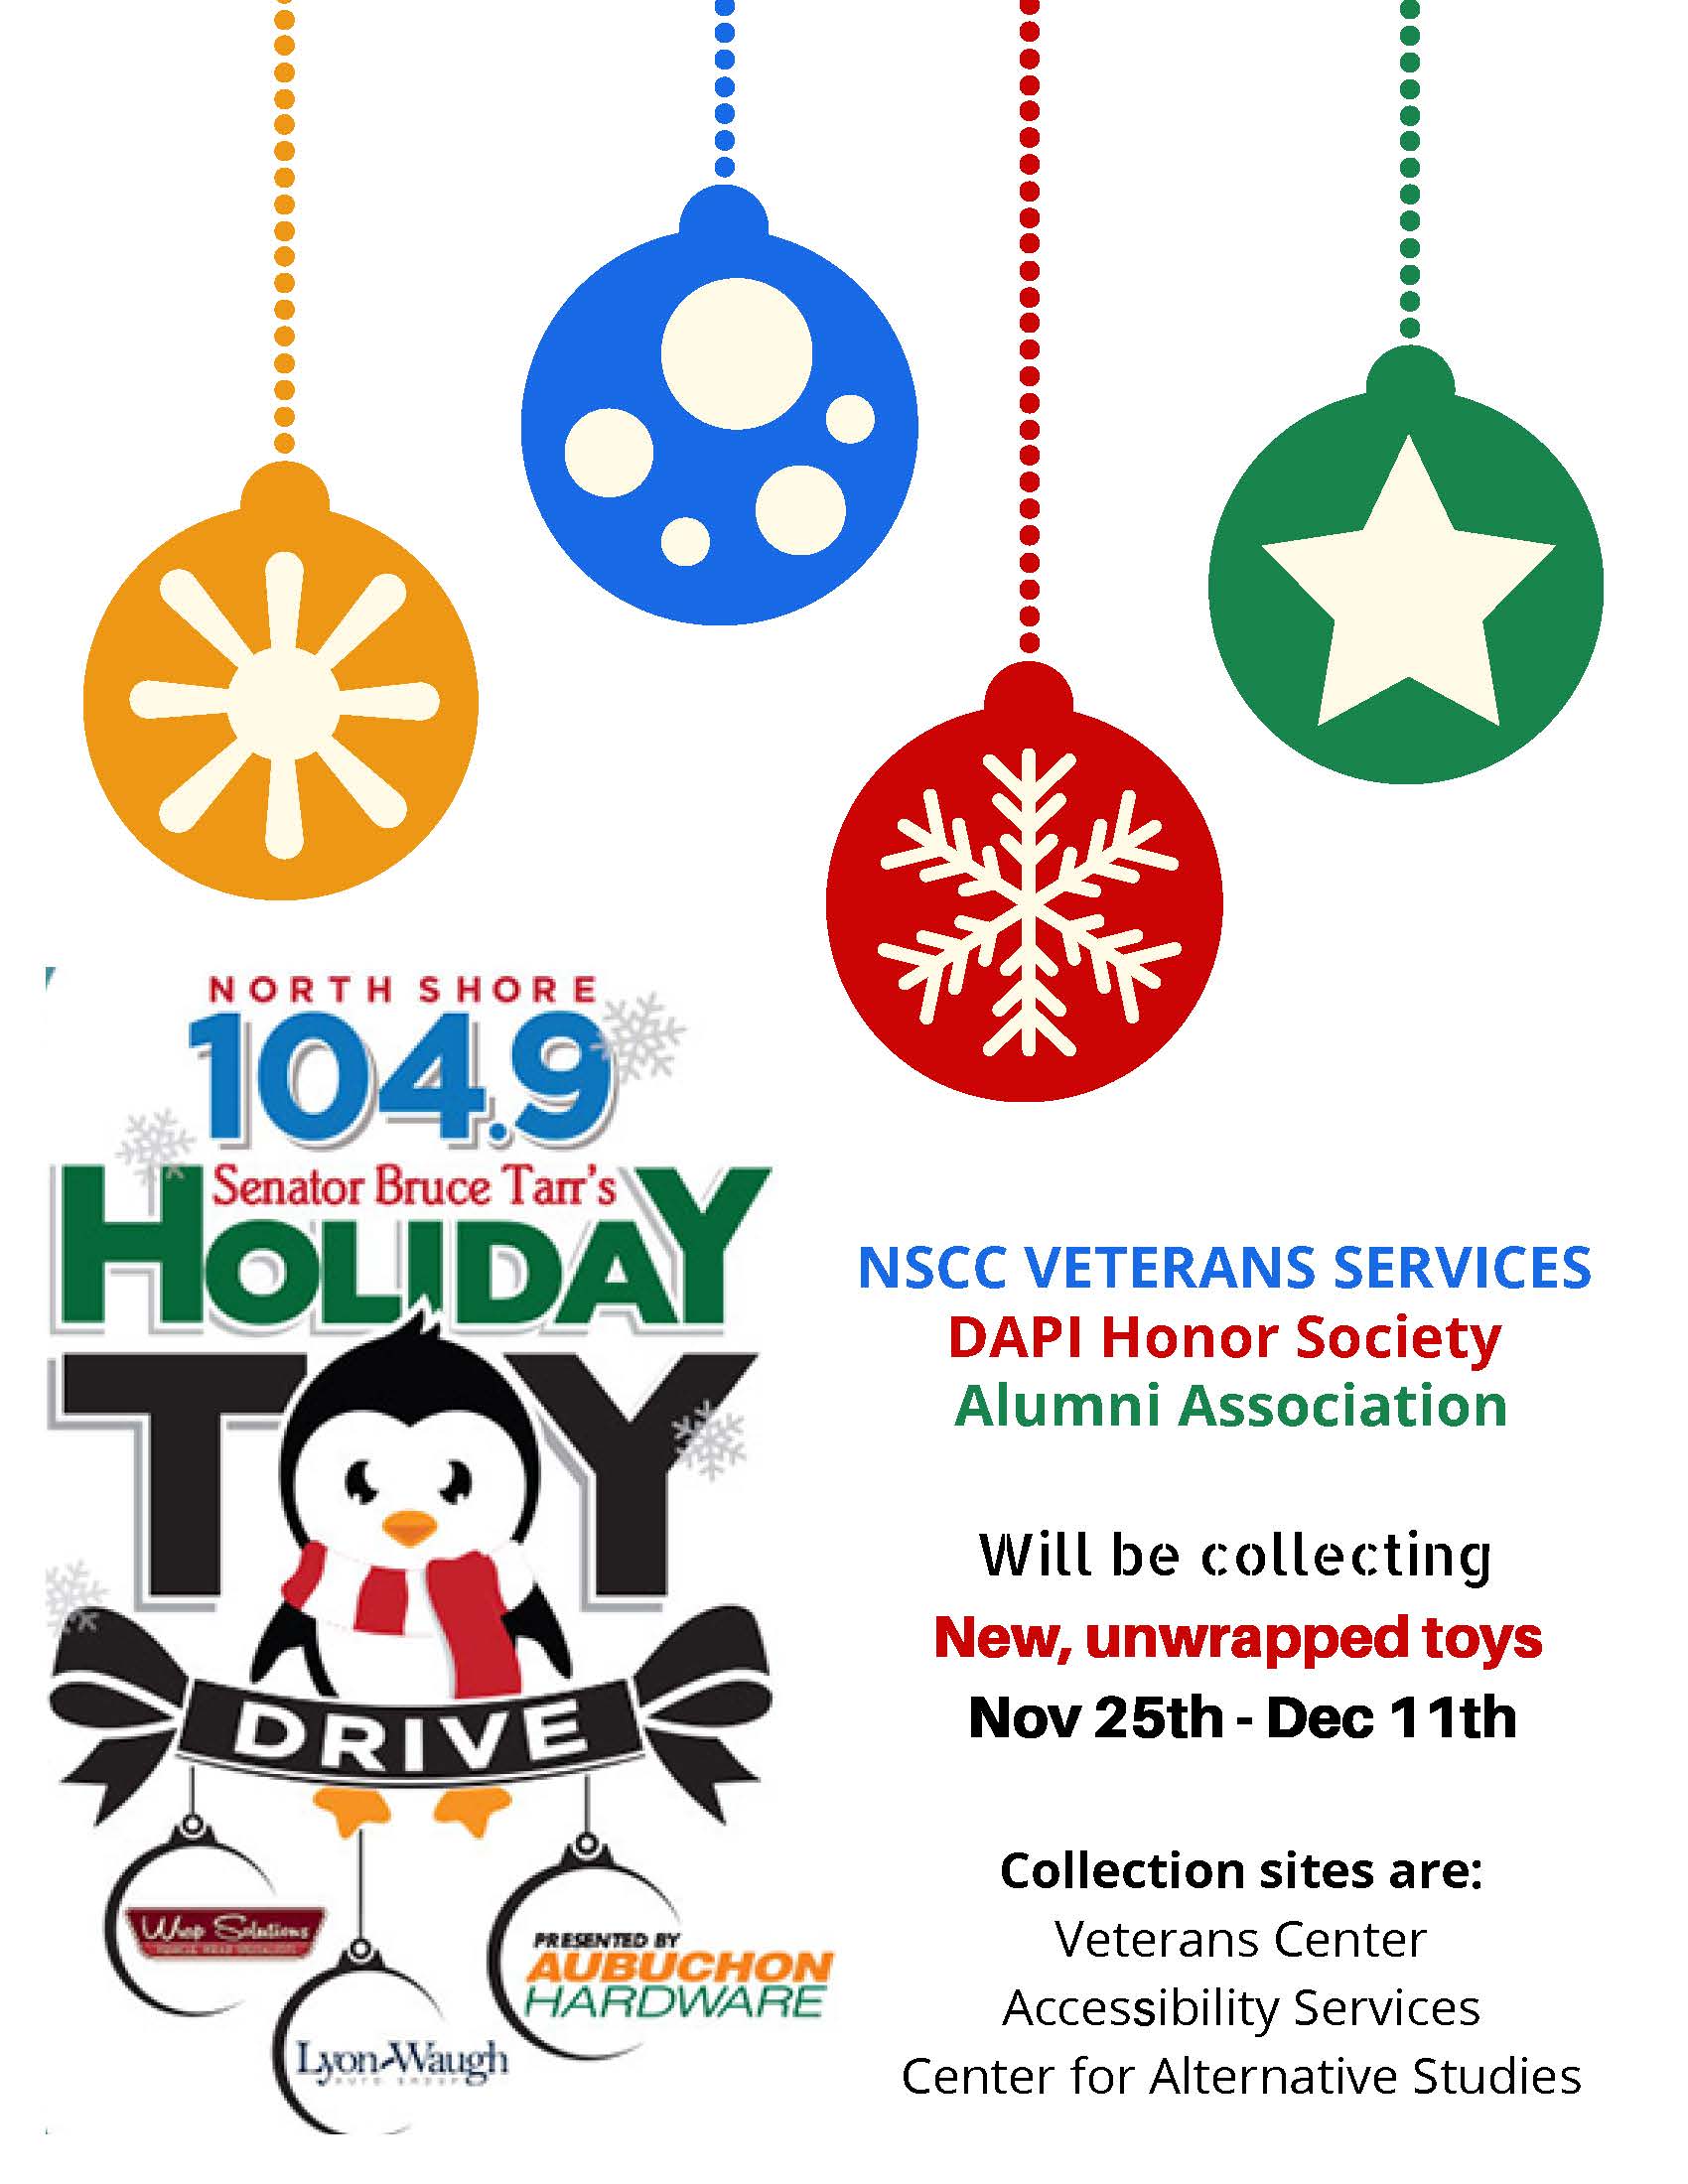 image of toy drive flyer